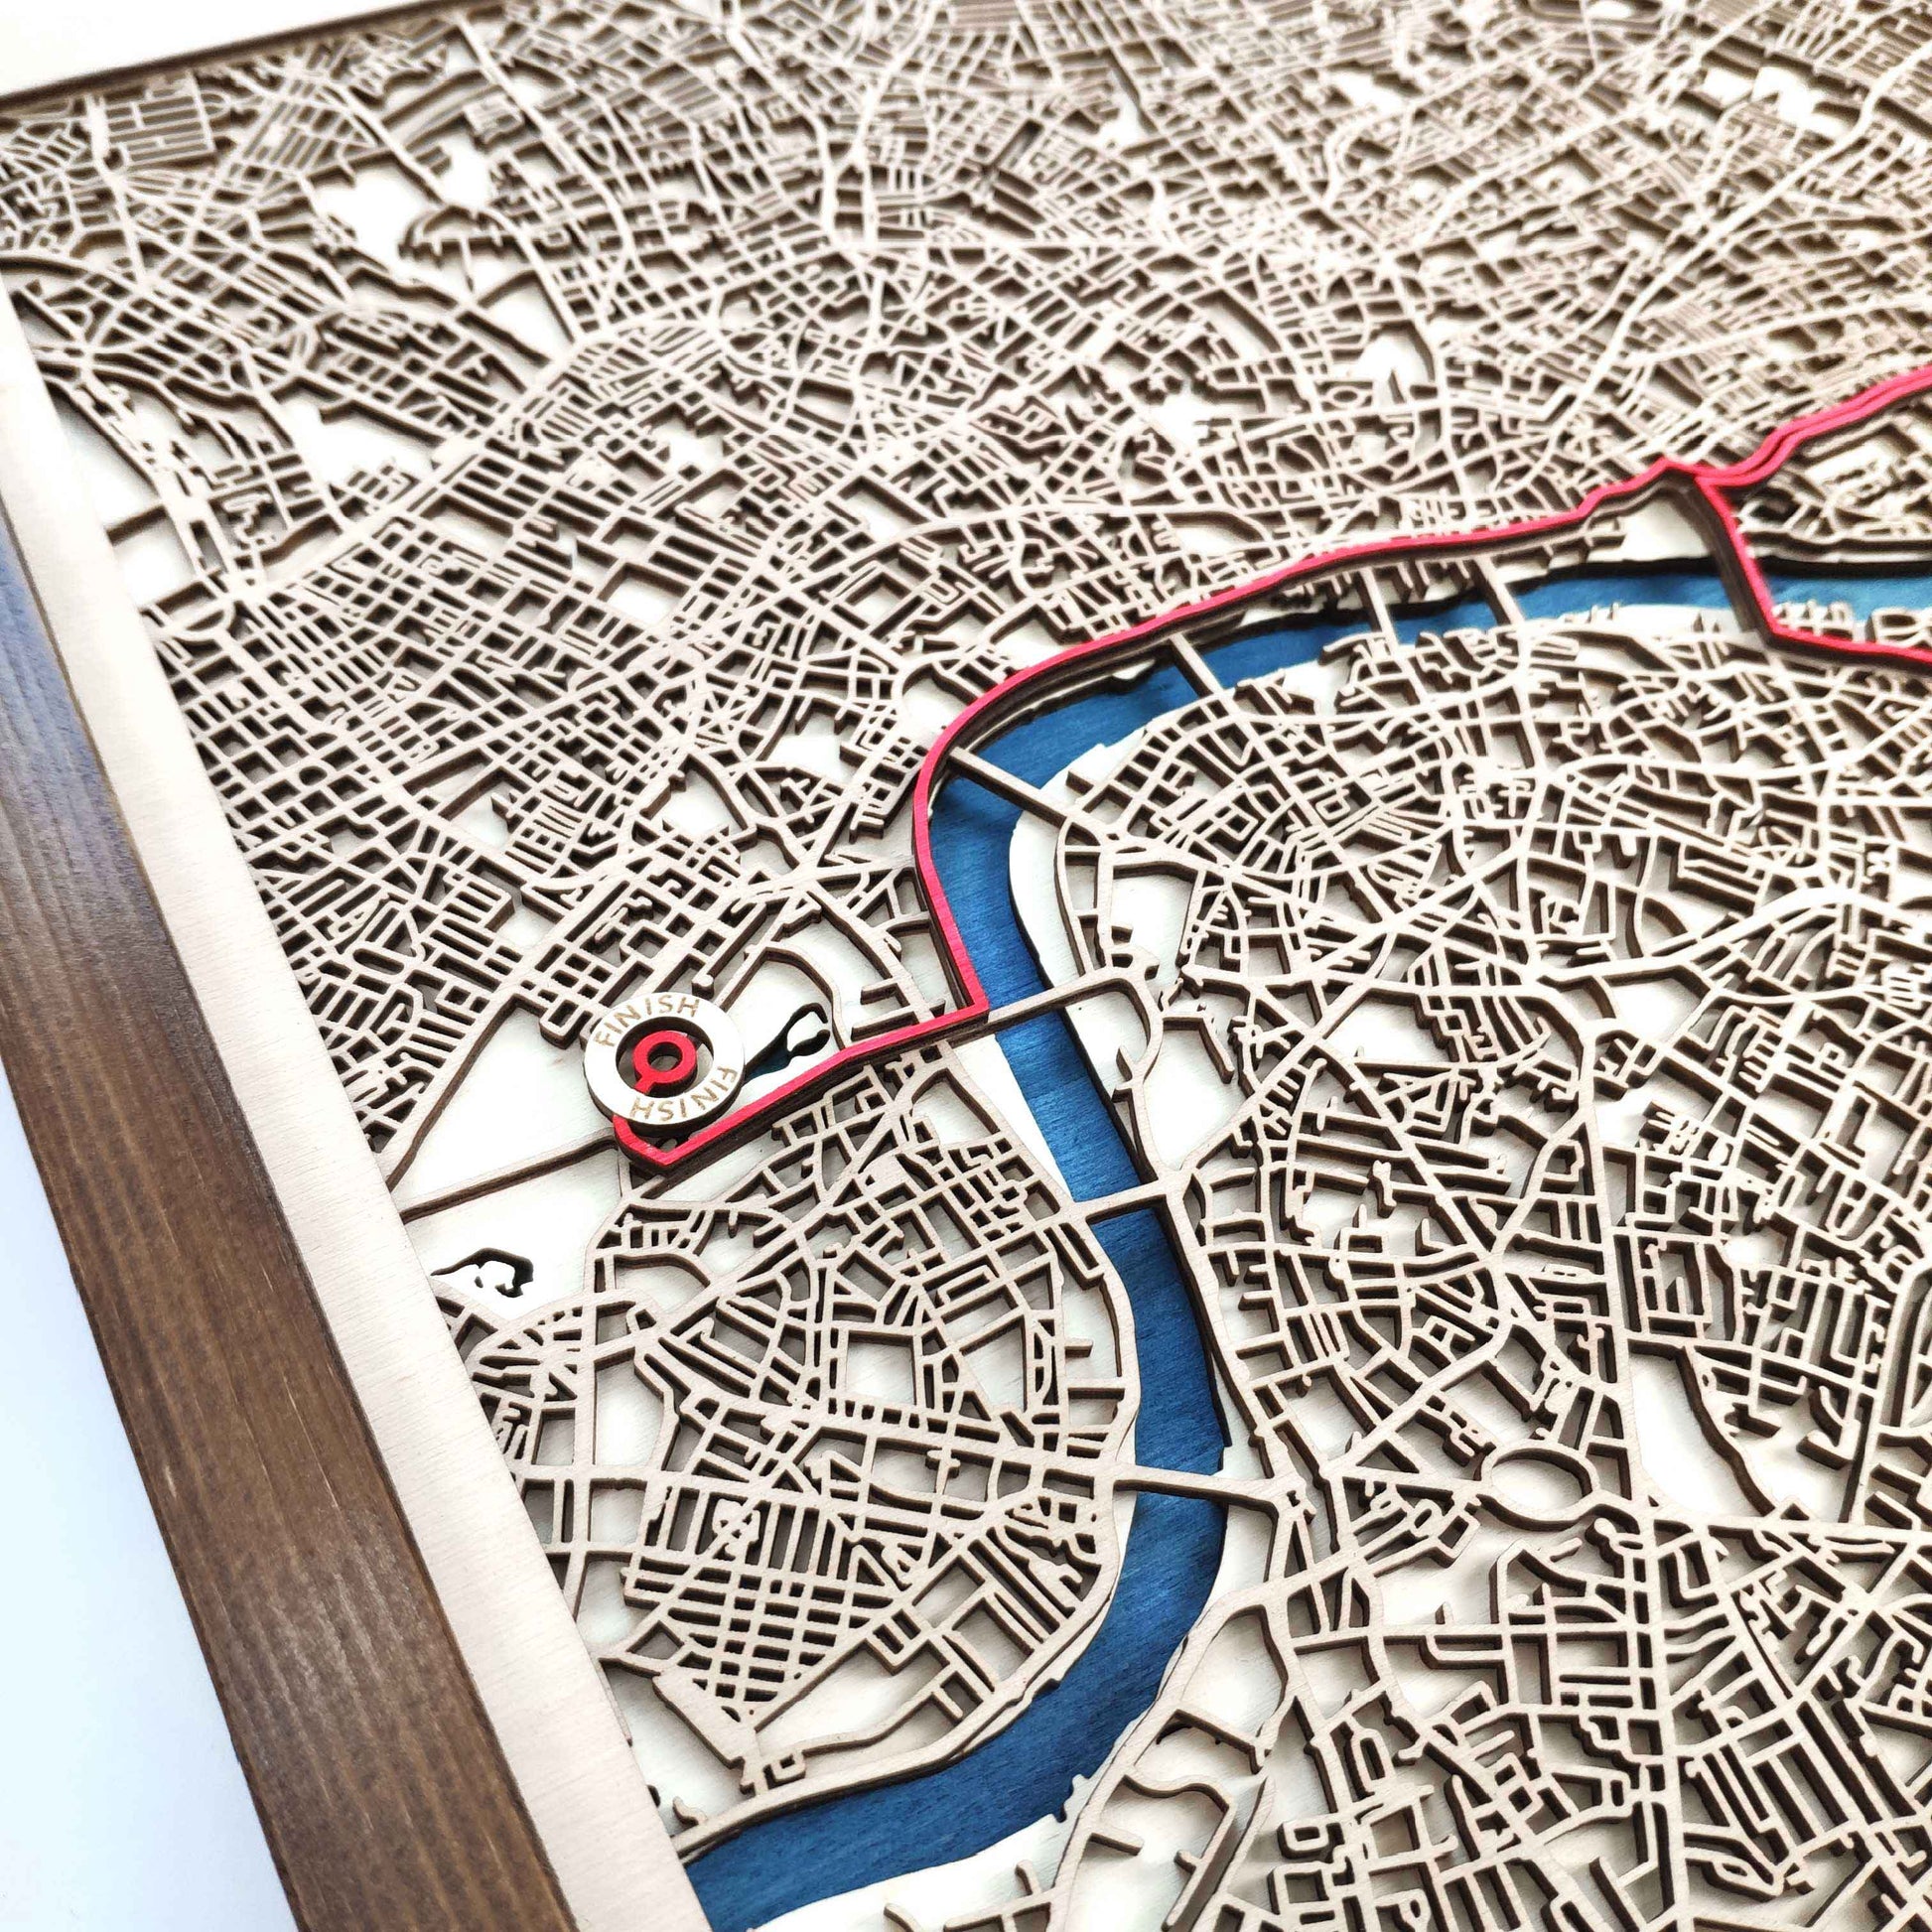 London Marathon Laser-Cut Wooden Map – Unique Runner Poster Gift by CityWood - Custom Wood Map Art - Unique Laser Cut Engraved - Anniversary Gift